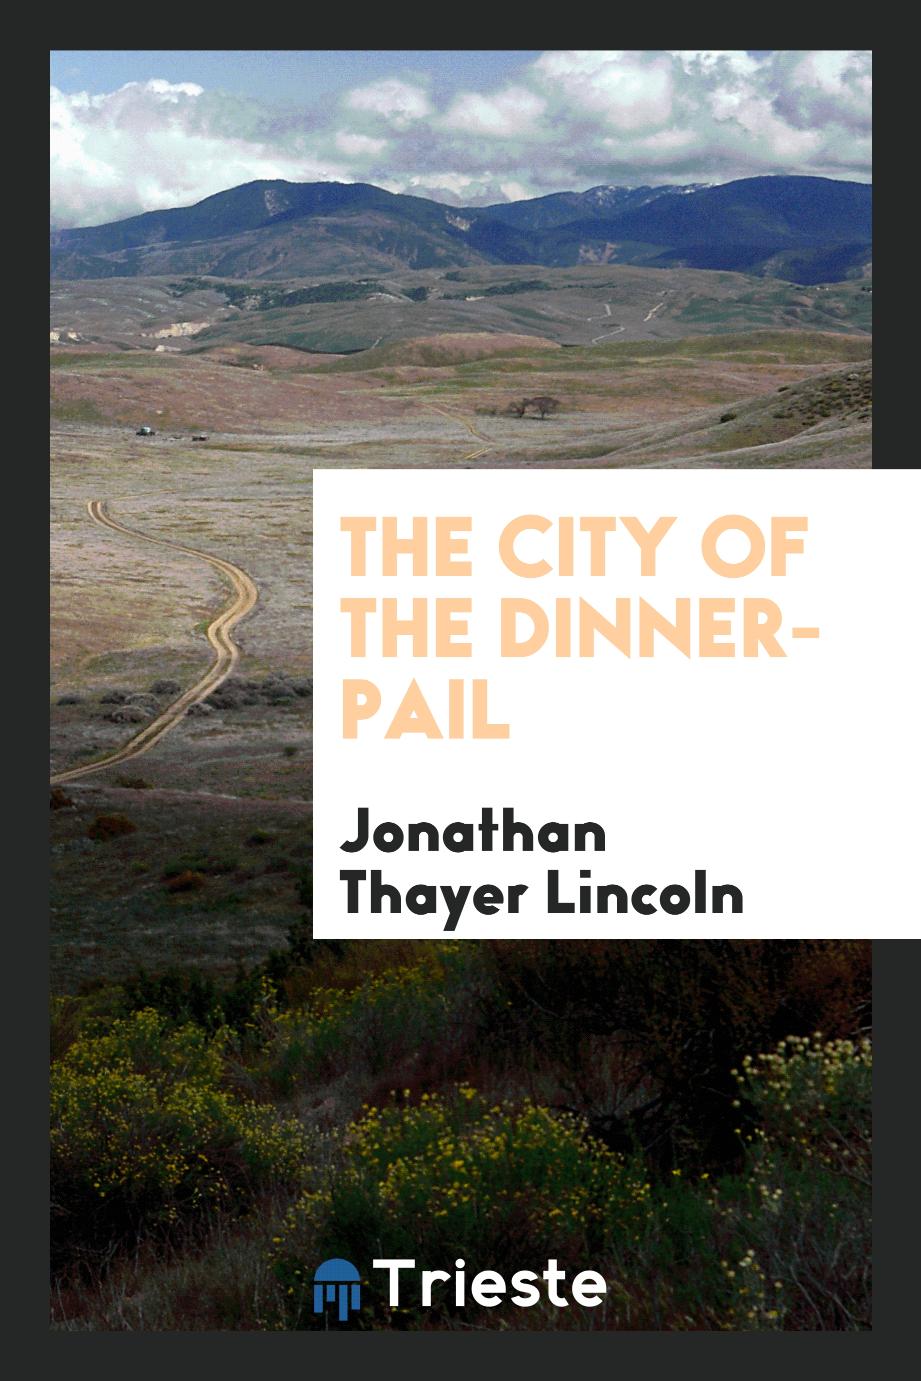 The City of the Dinner-Pail